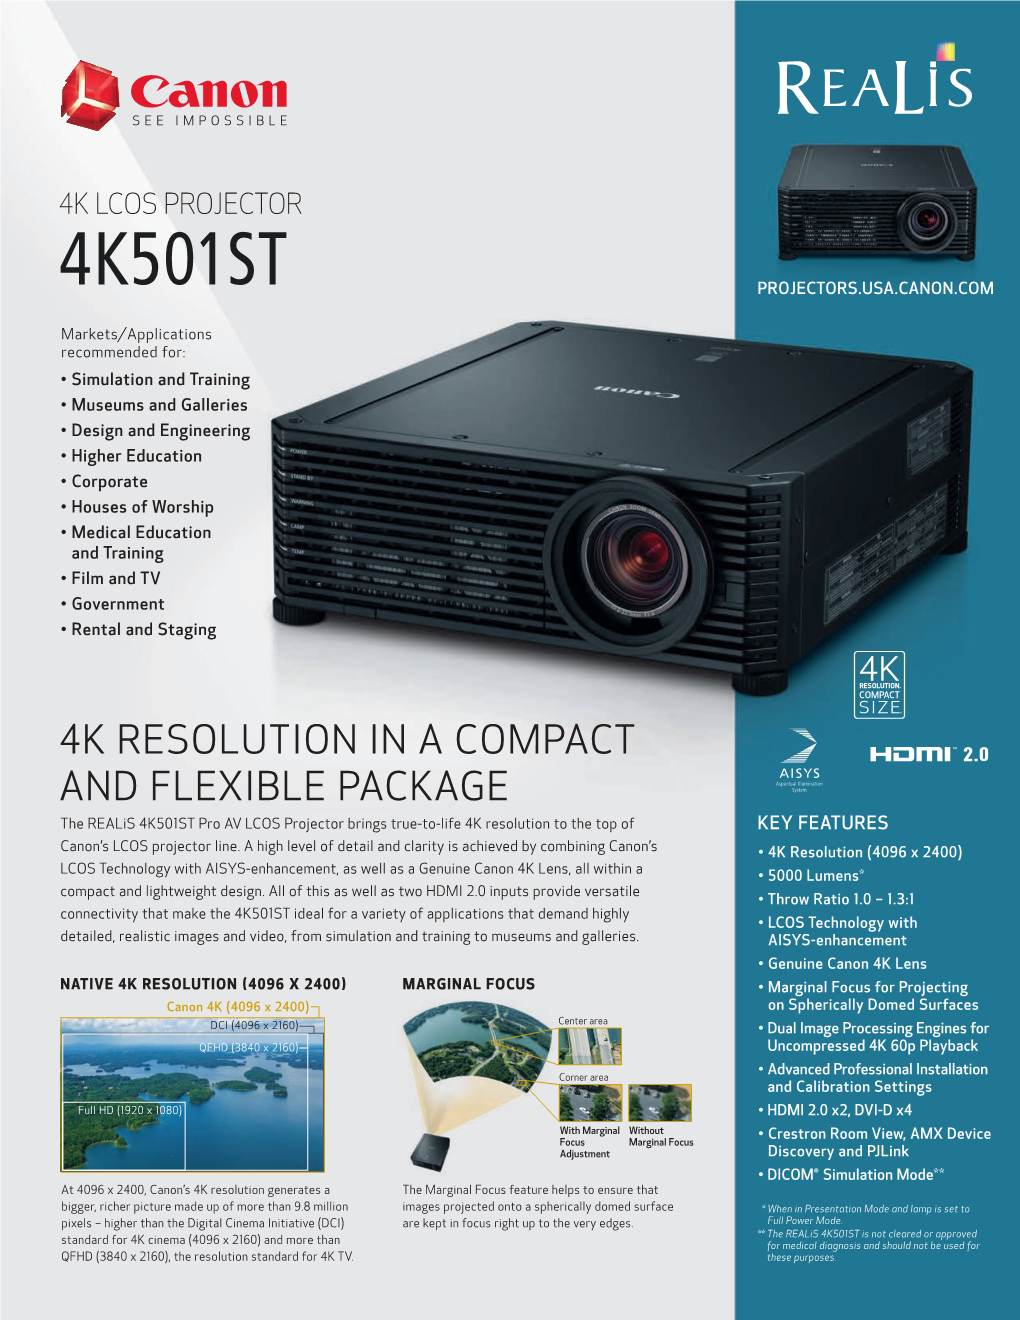 4K Resolution in a Compact and Flexible Package